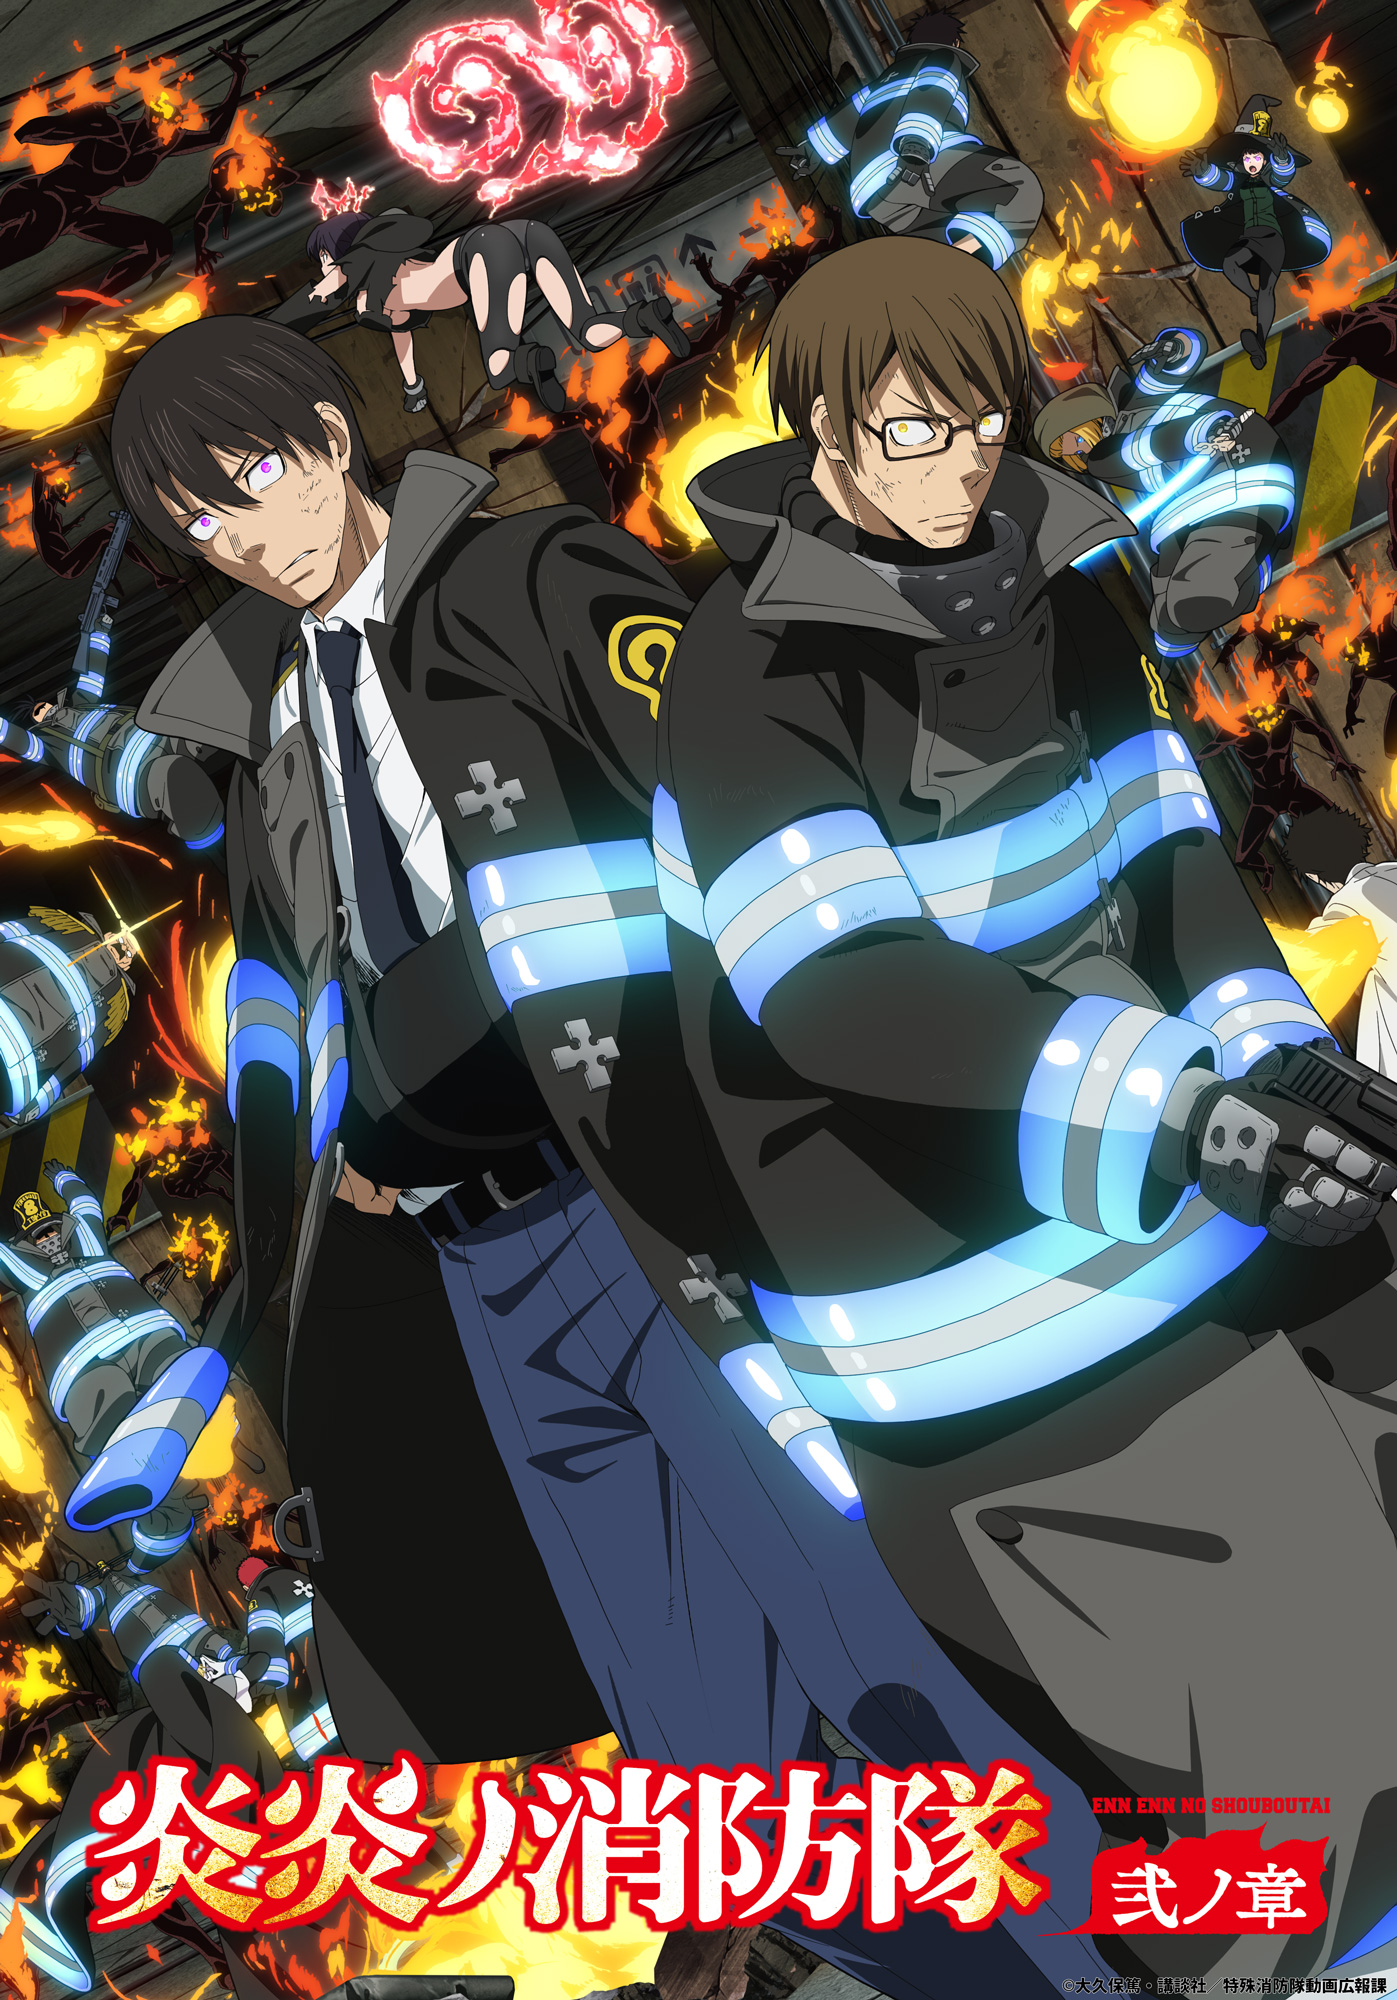 Fire Force Anime reveals new visual elements for the upcoming arc.